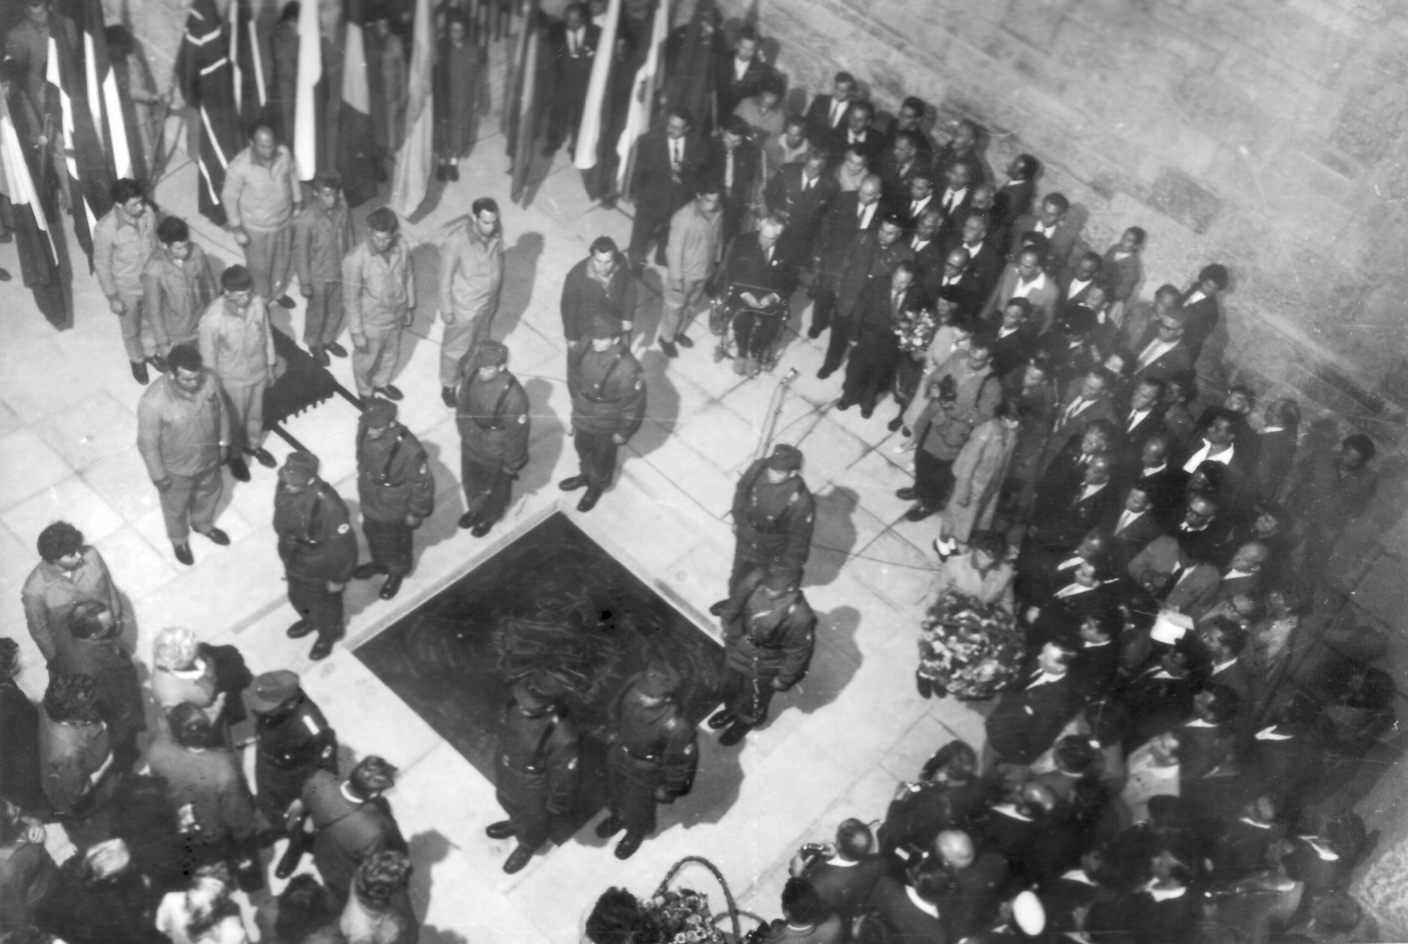  Inauguration ceremony of the Buchenwald National Memorial. Memorial ceremony in the bell tower. View from the stairwell to the slab of the urn grave surrounded by members of the combat groups.